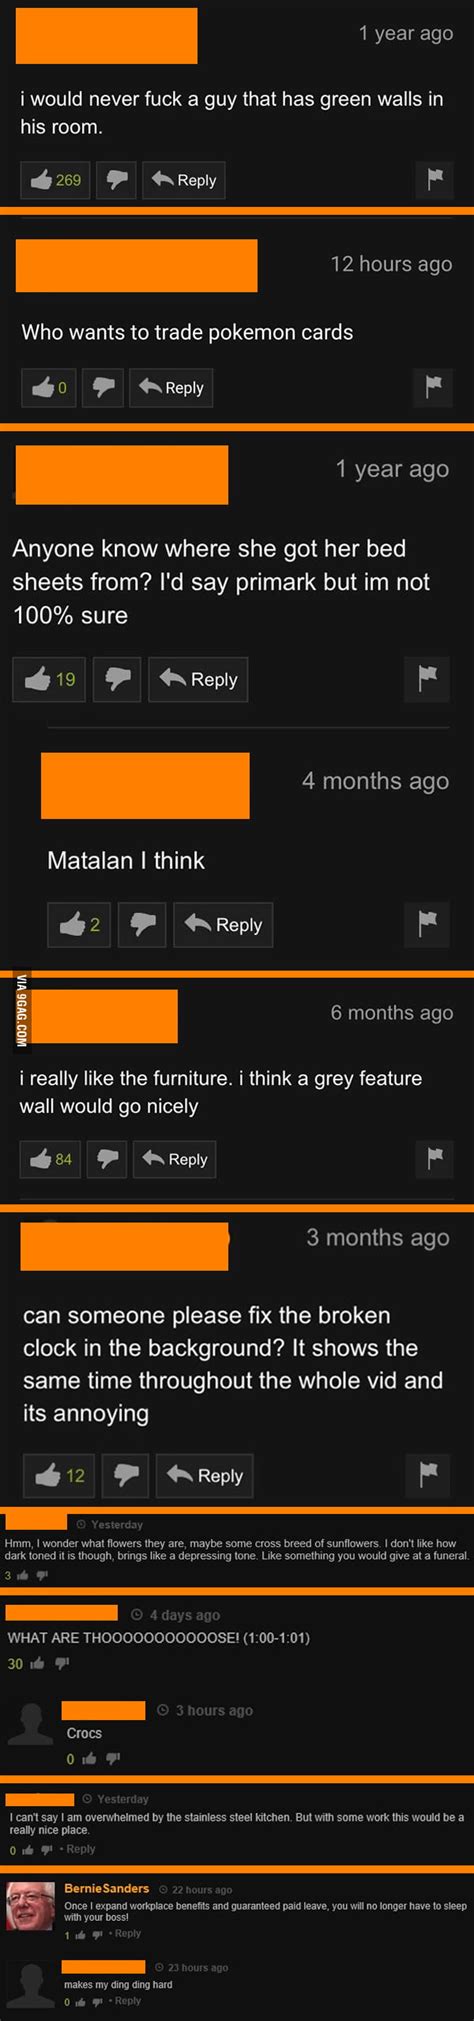 9 pornhub viewers who totally miss the porn i mean point